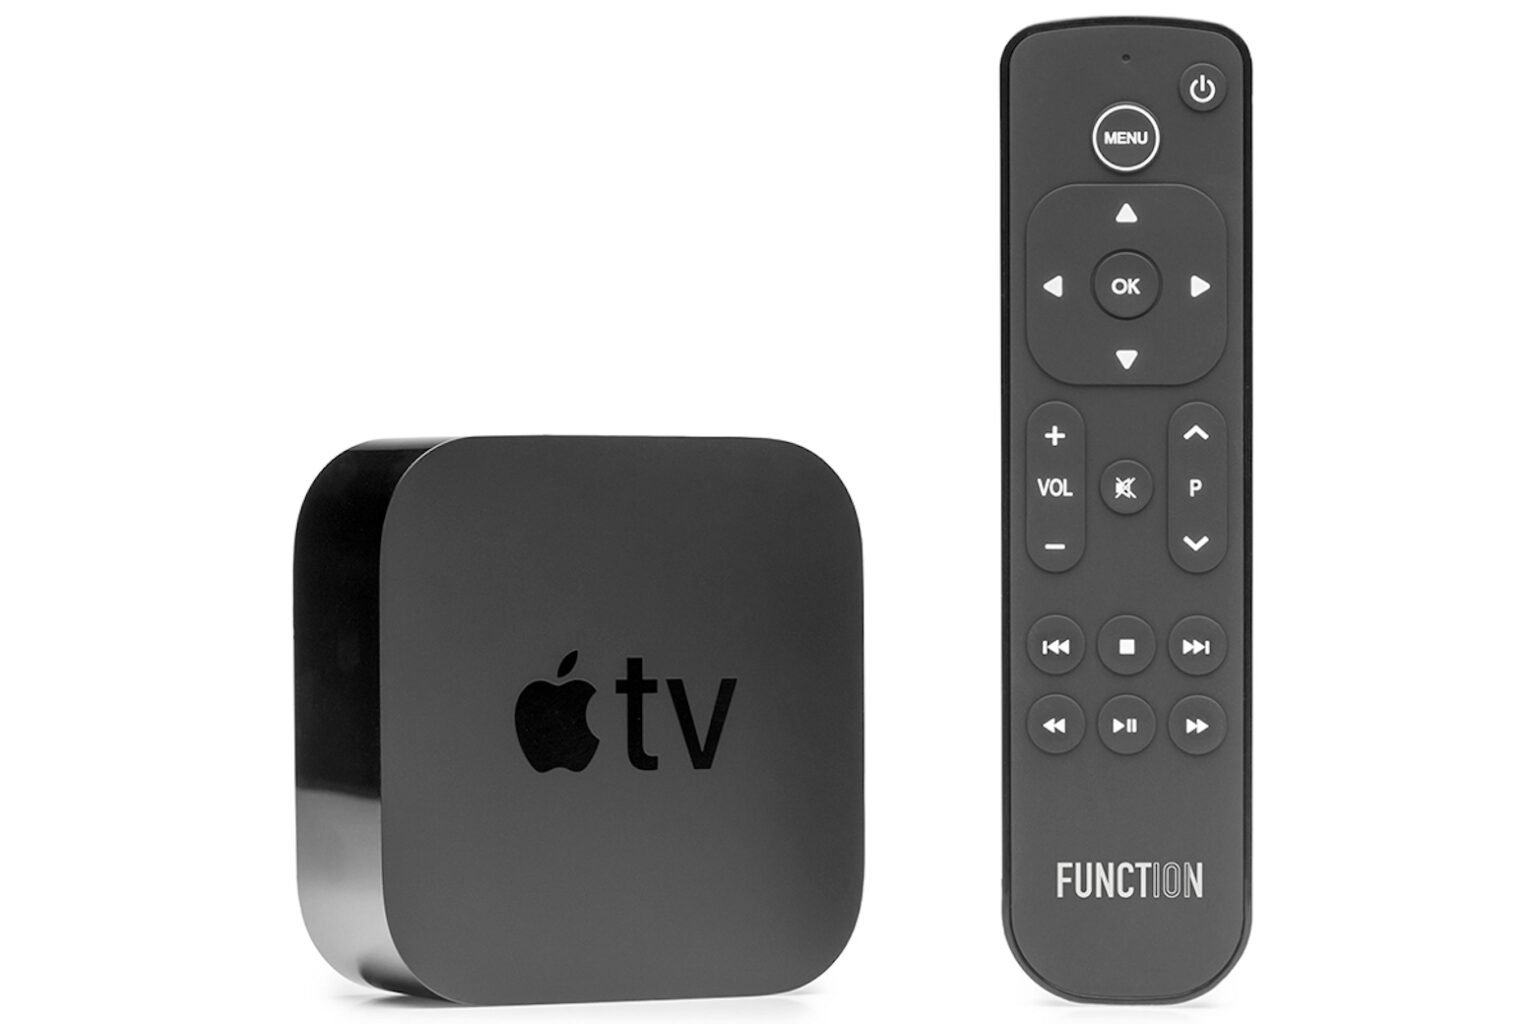 Navigate Apple TV like never before with this affordable button remote.